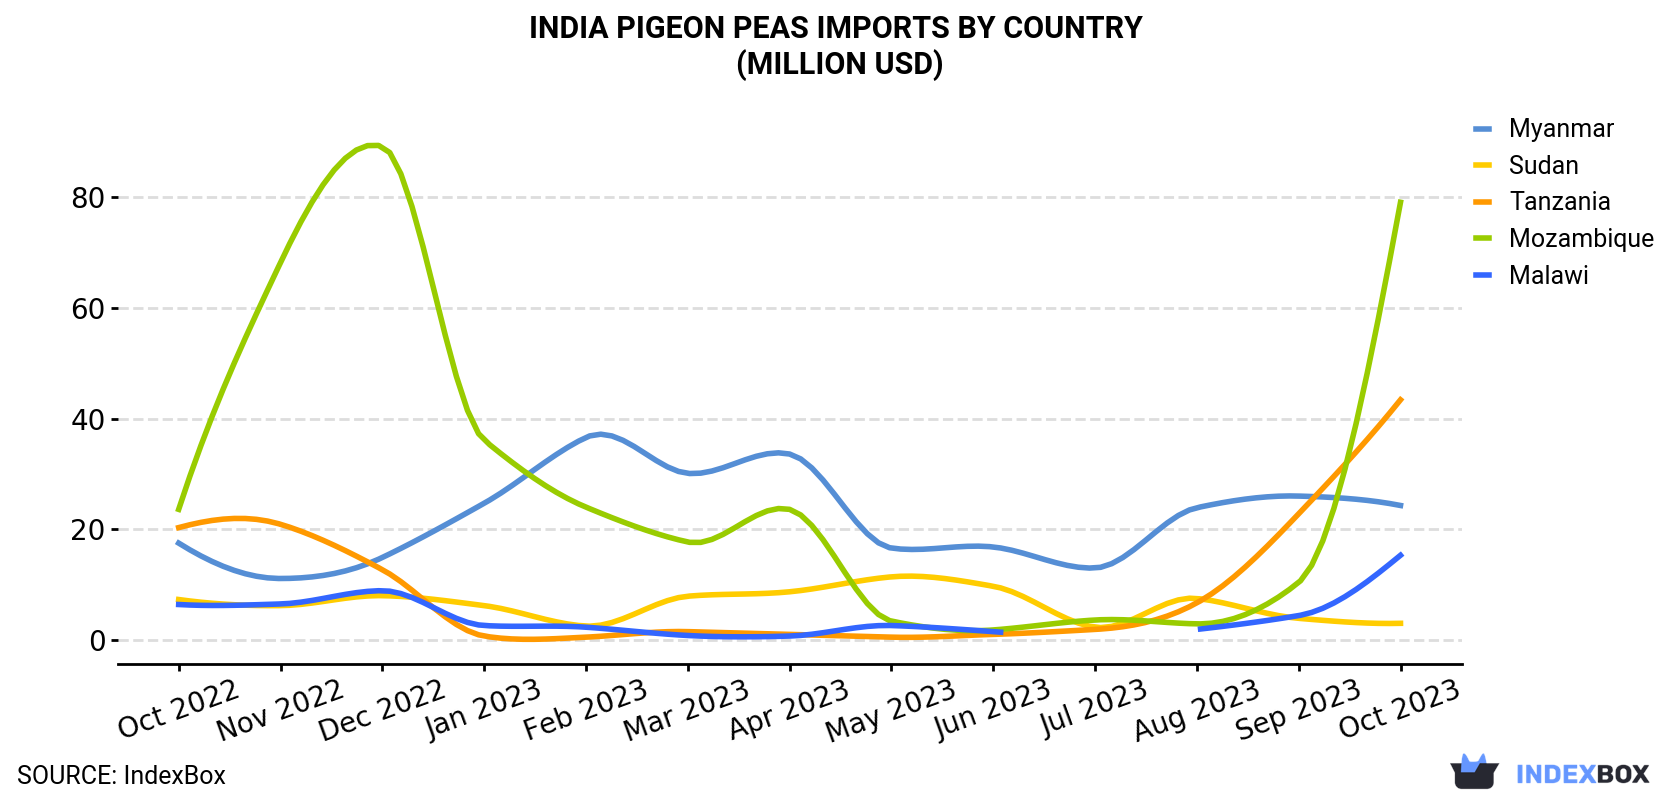 India Pigeon Peas Imports By Country (Million USD)